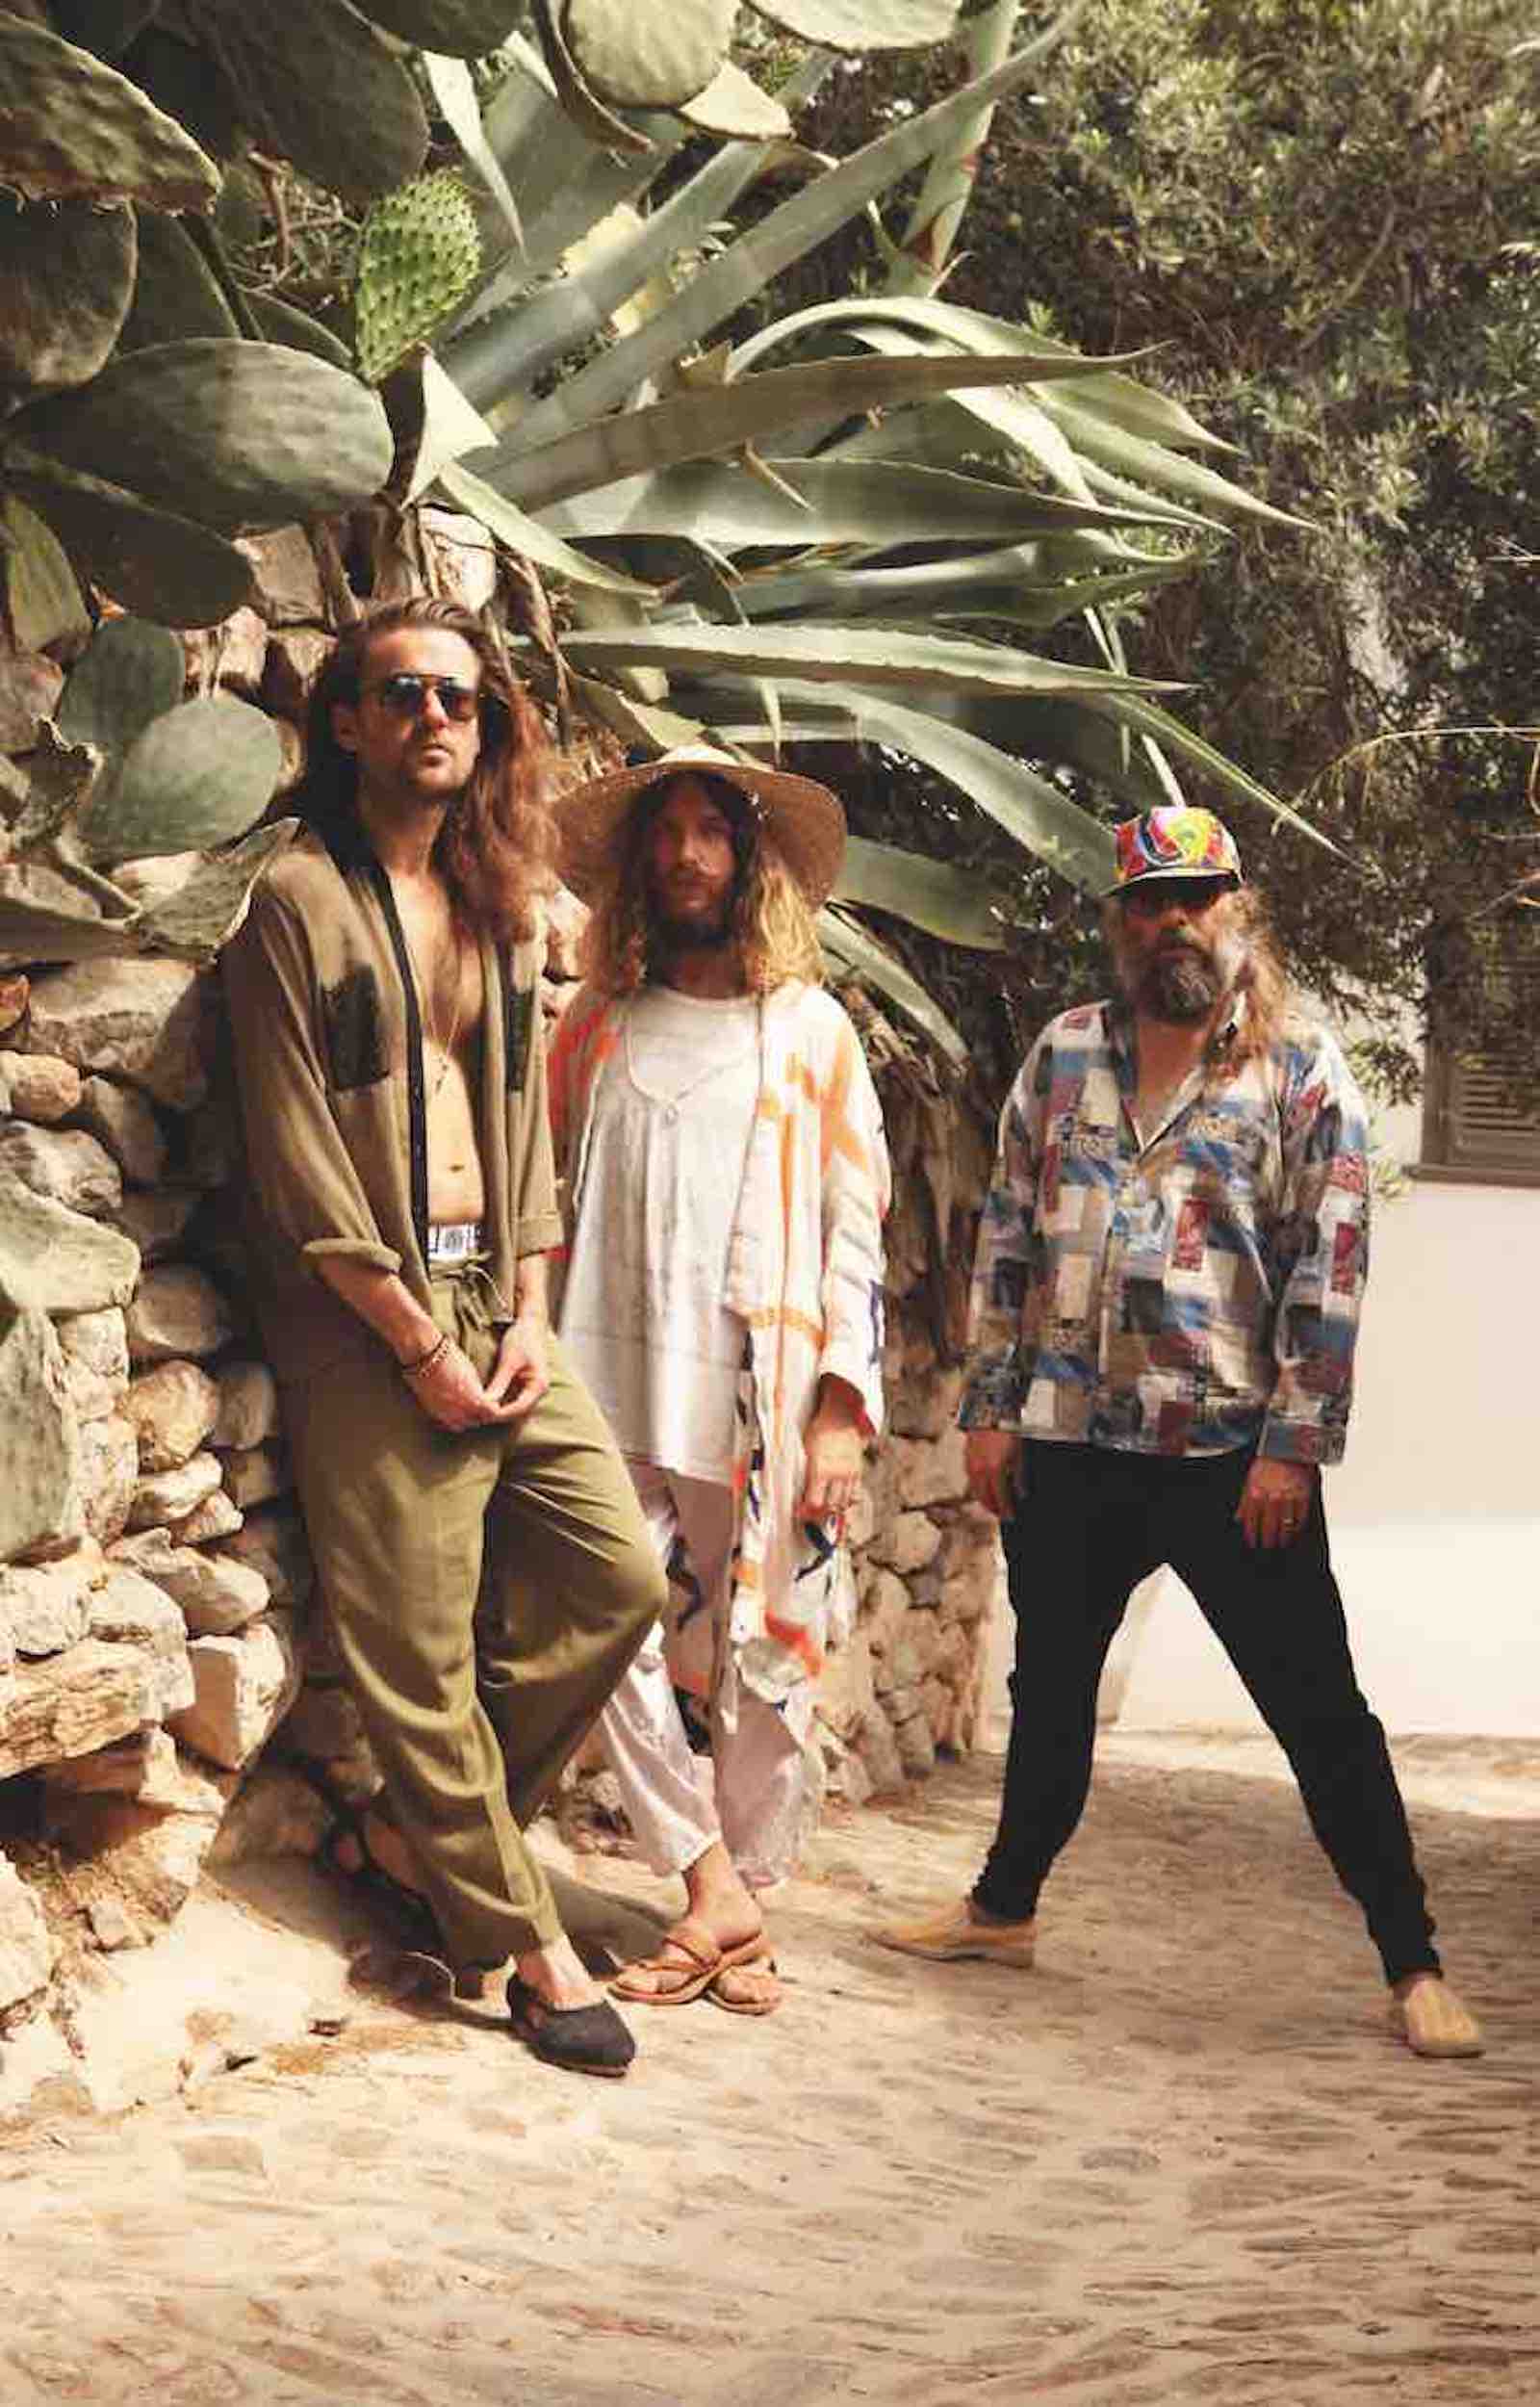 Sebastien Tellier and the Mind Gamers at the Old Carpet Factory Recording Studio in Greece